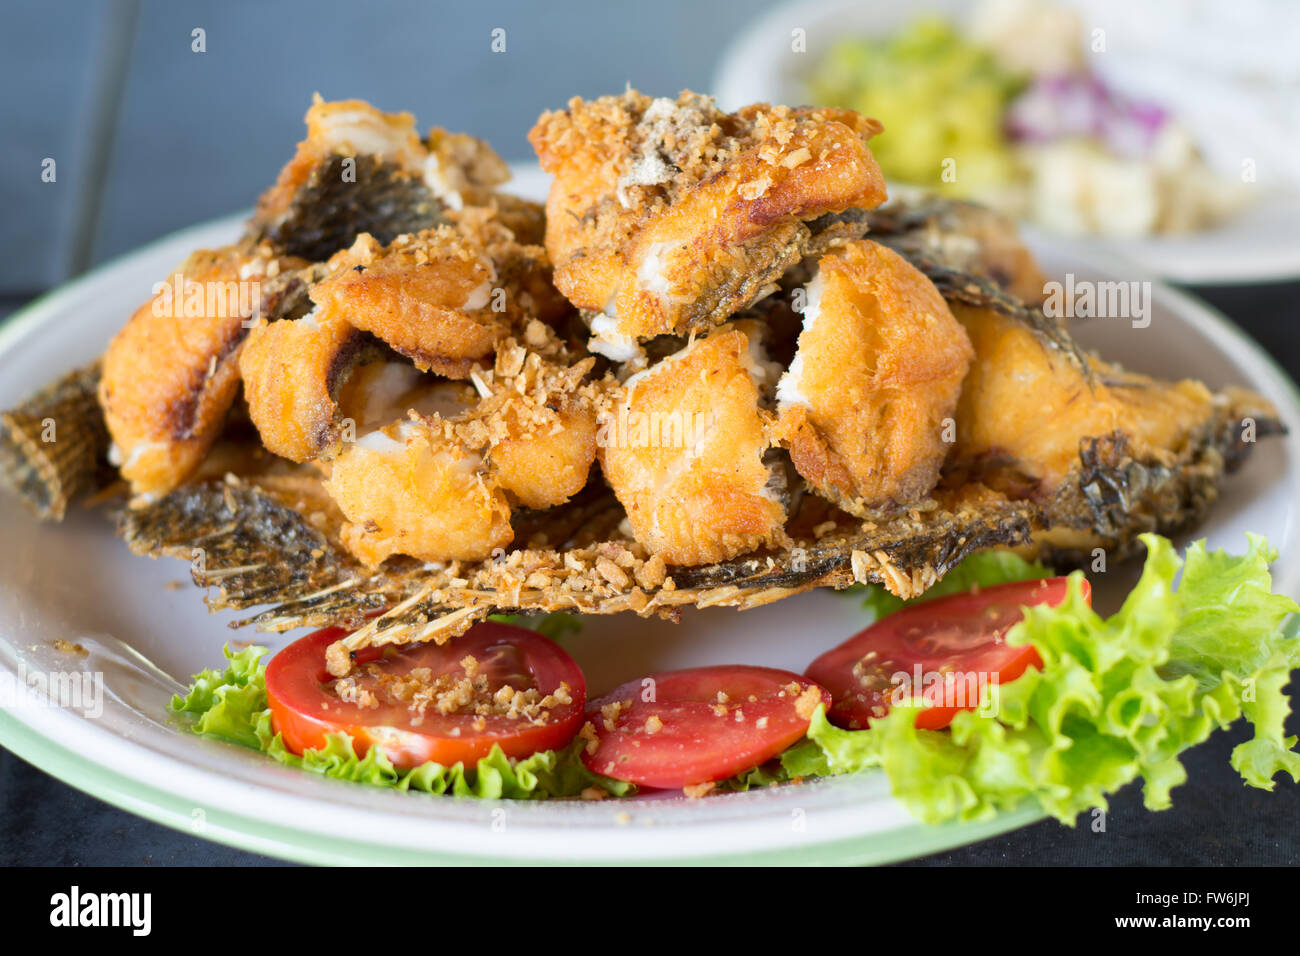 Delicious fried tilapia fish in a plat Stock Photo